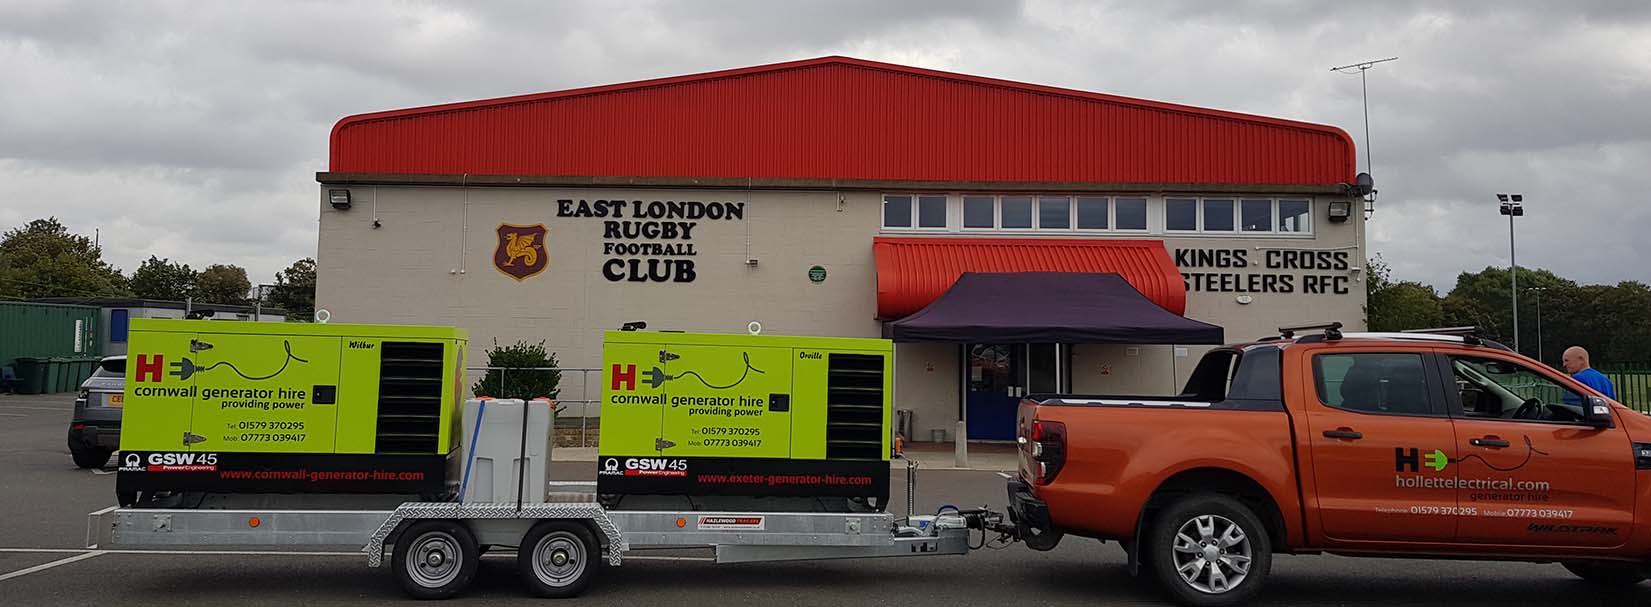 Generators delivered to East London rugby football club